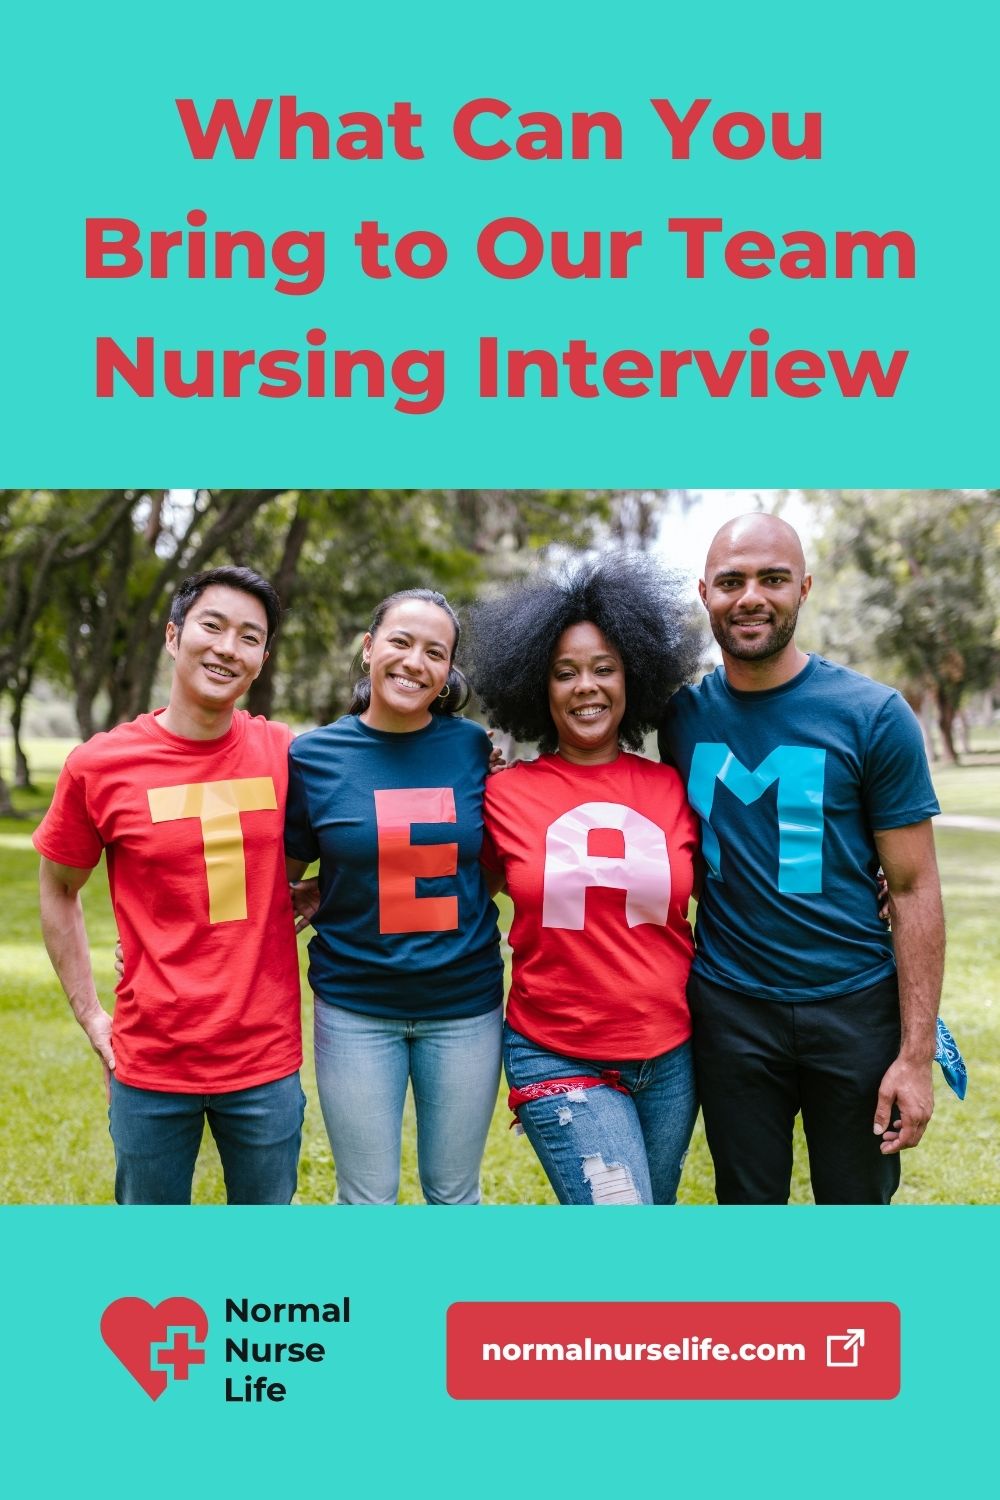 What can you bring to our team nursing interview question